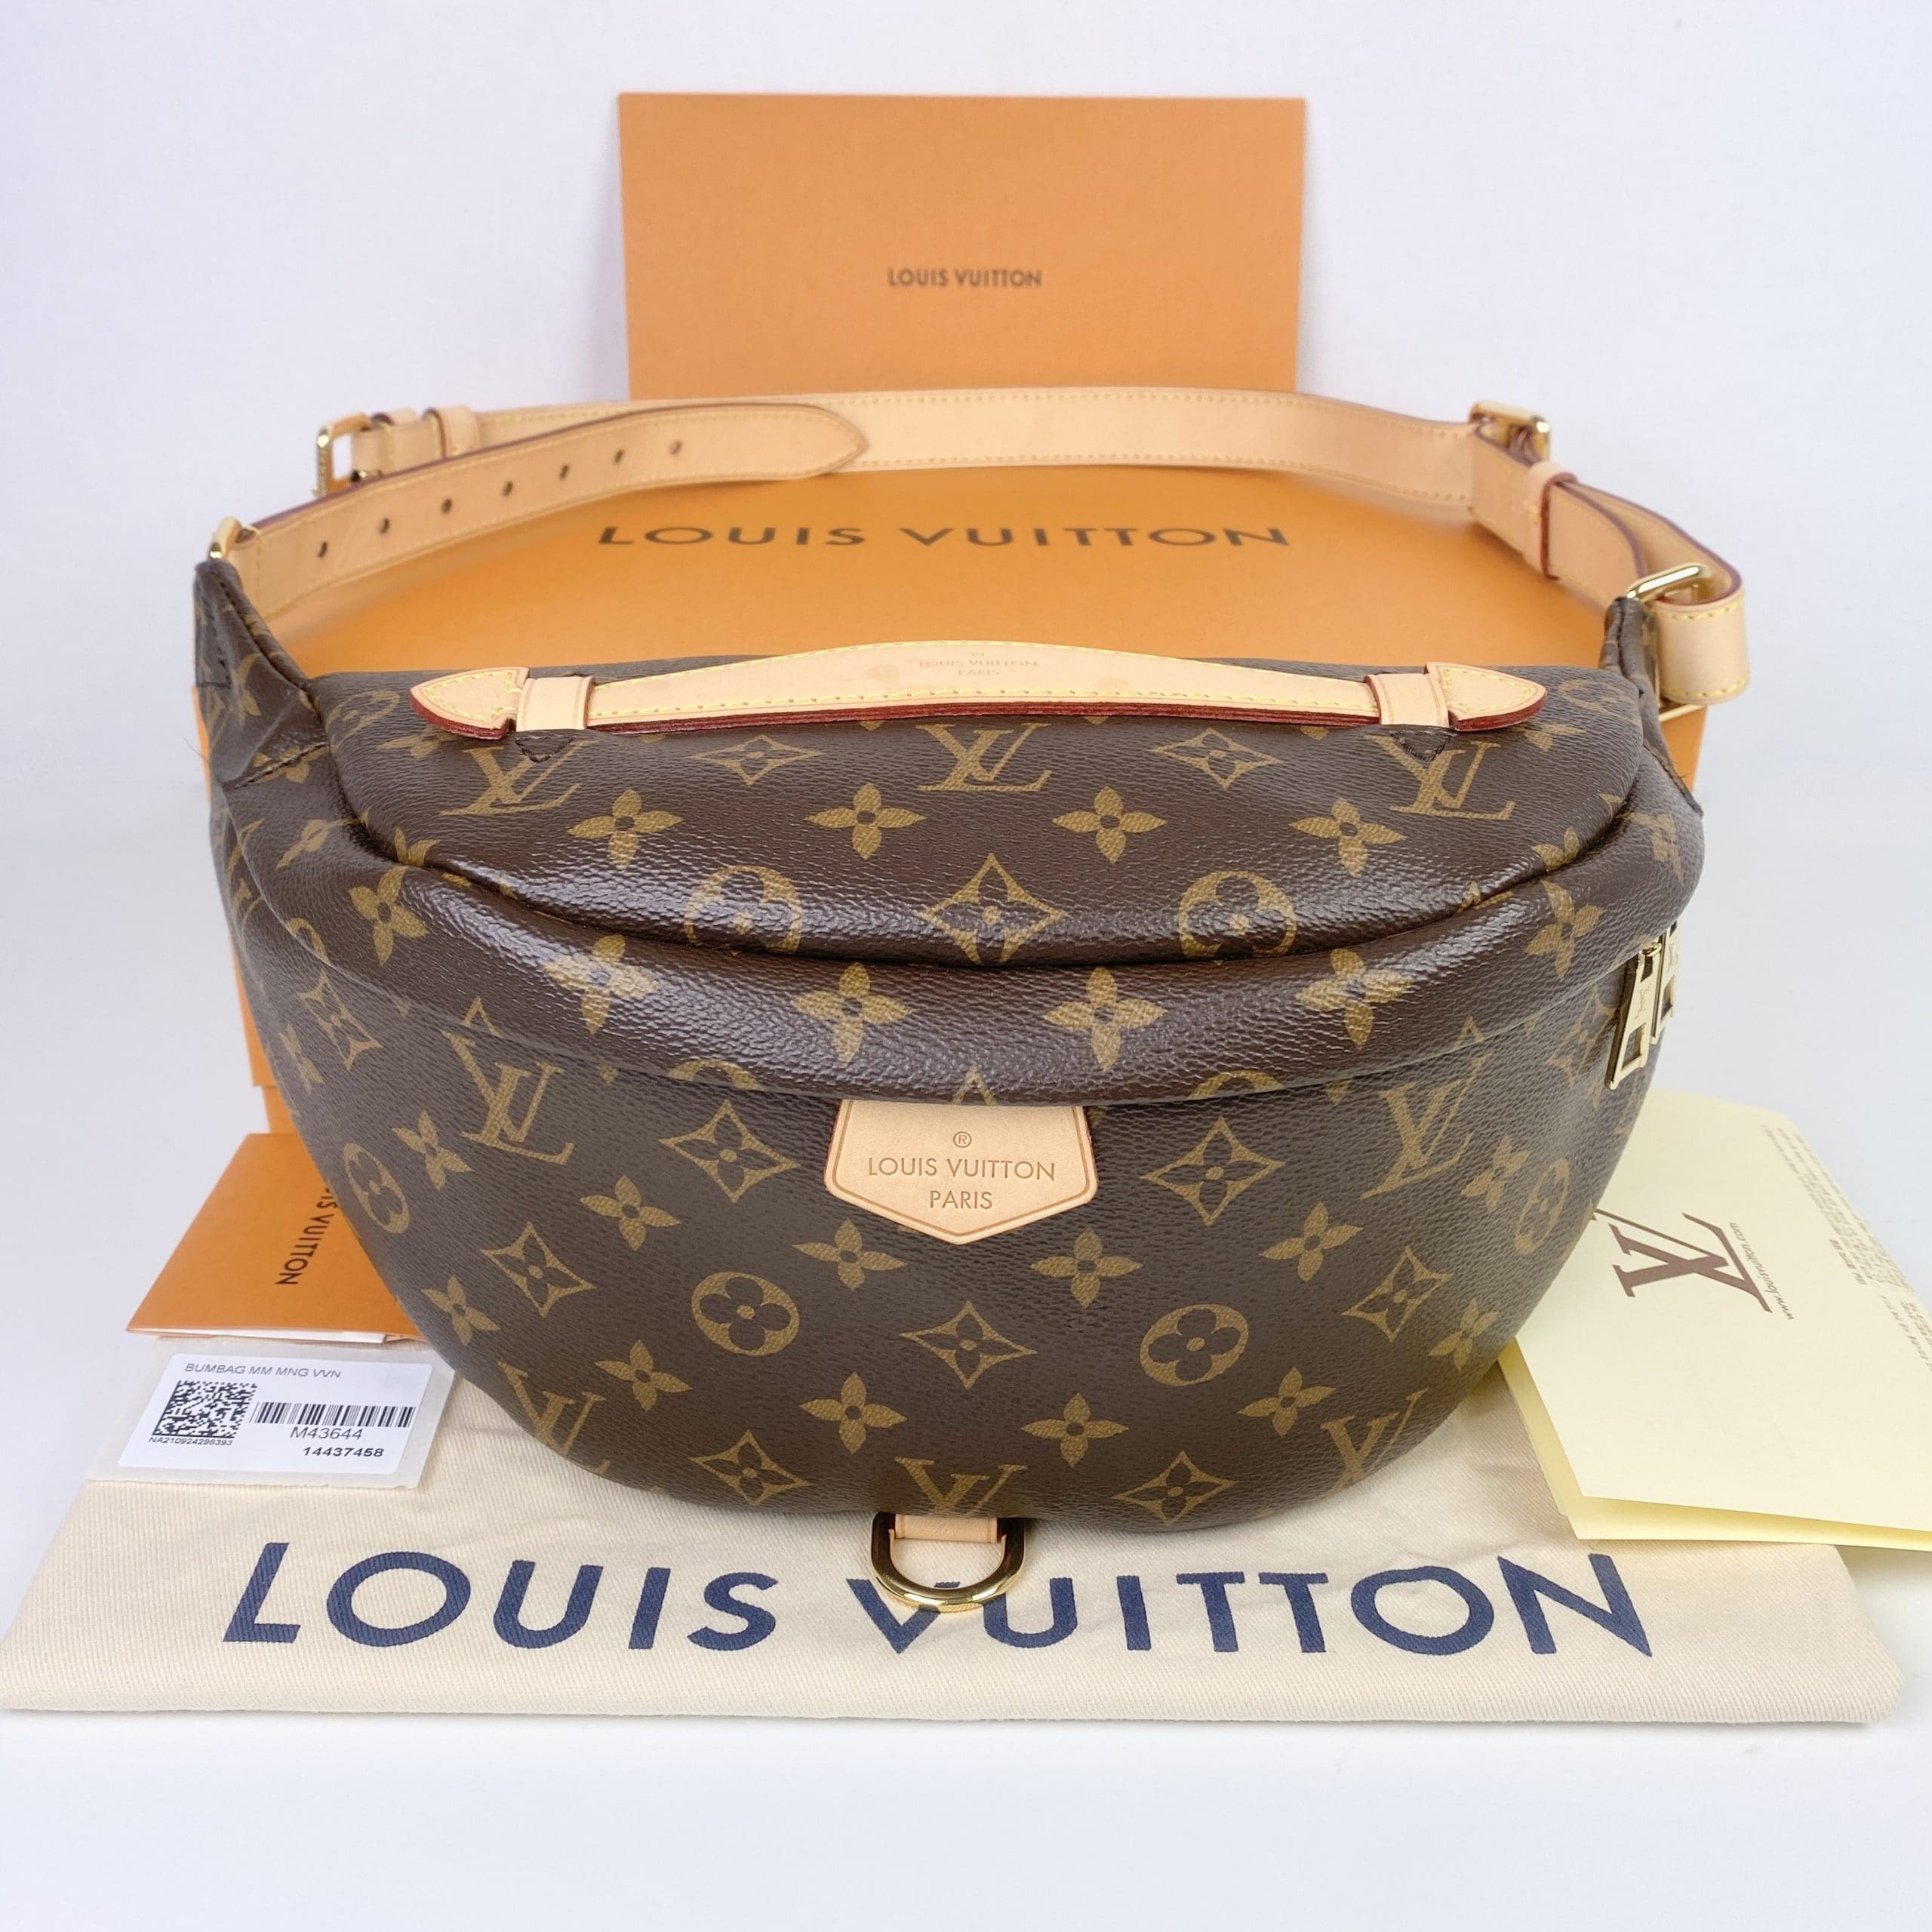 Help me to check if it is already microchipped this model.. : r/Louisvuitton